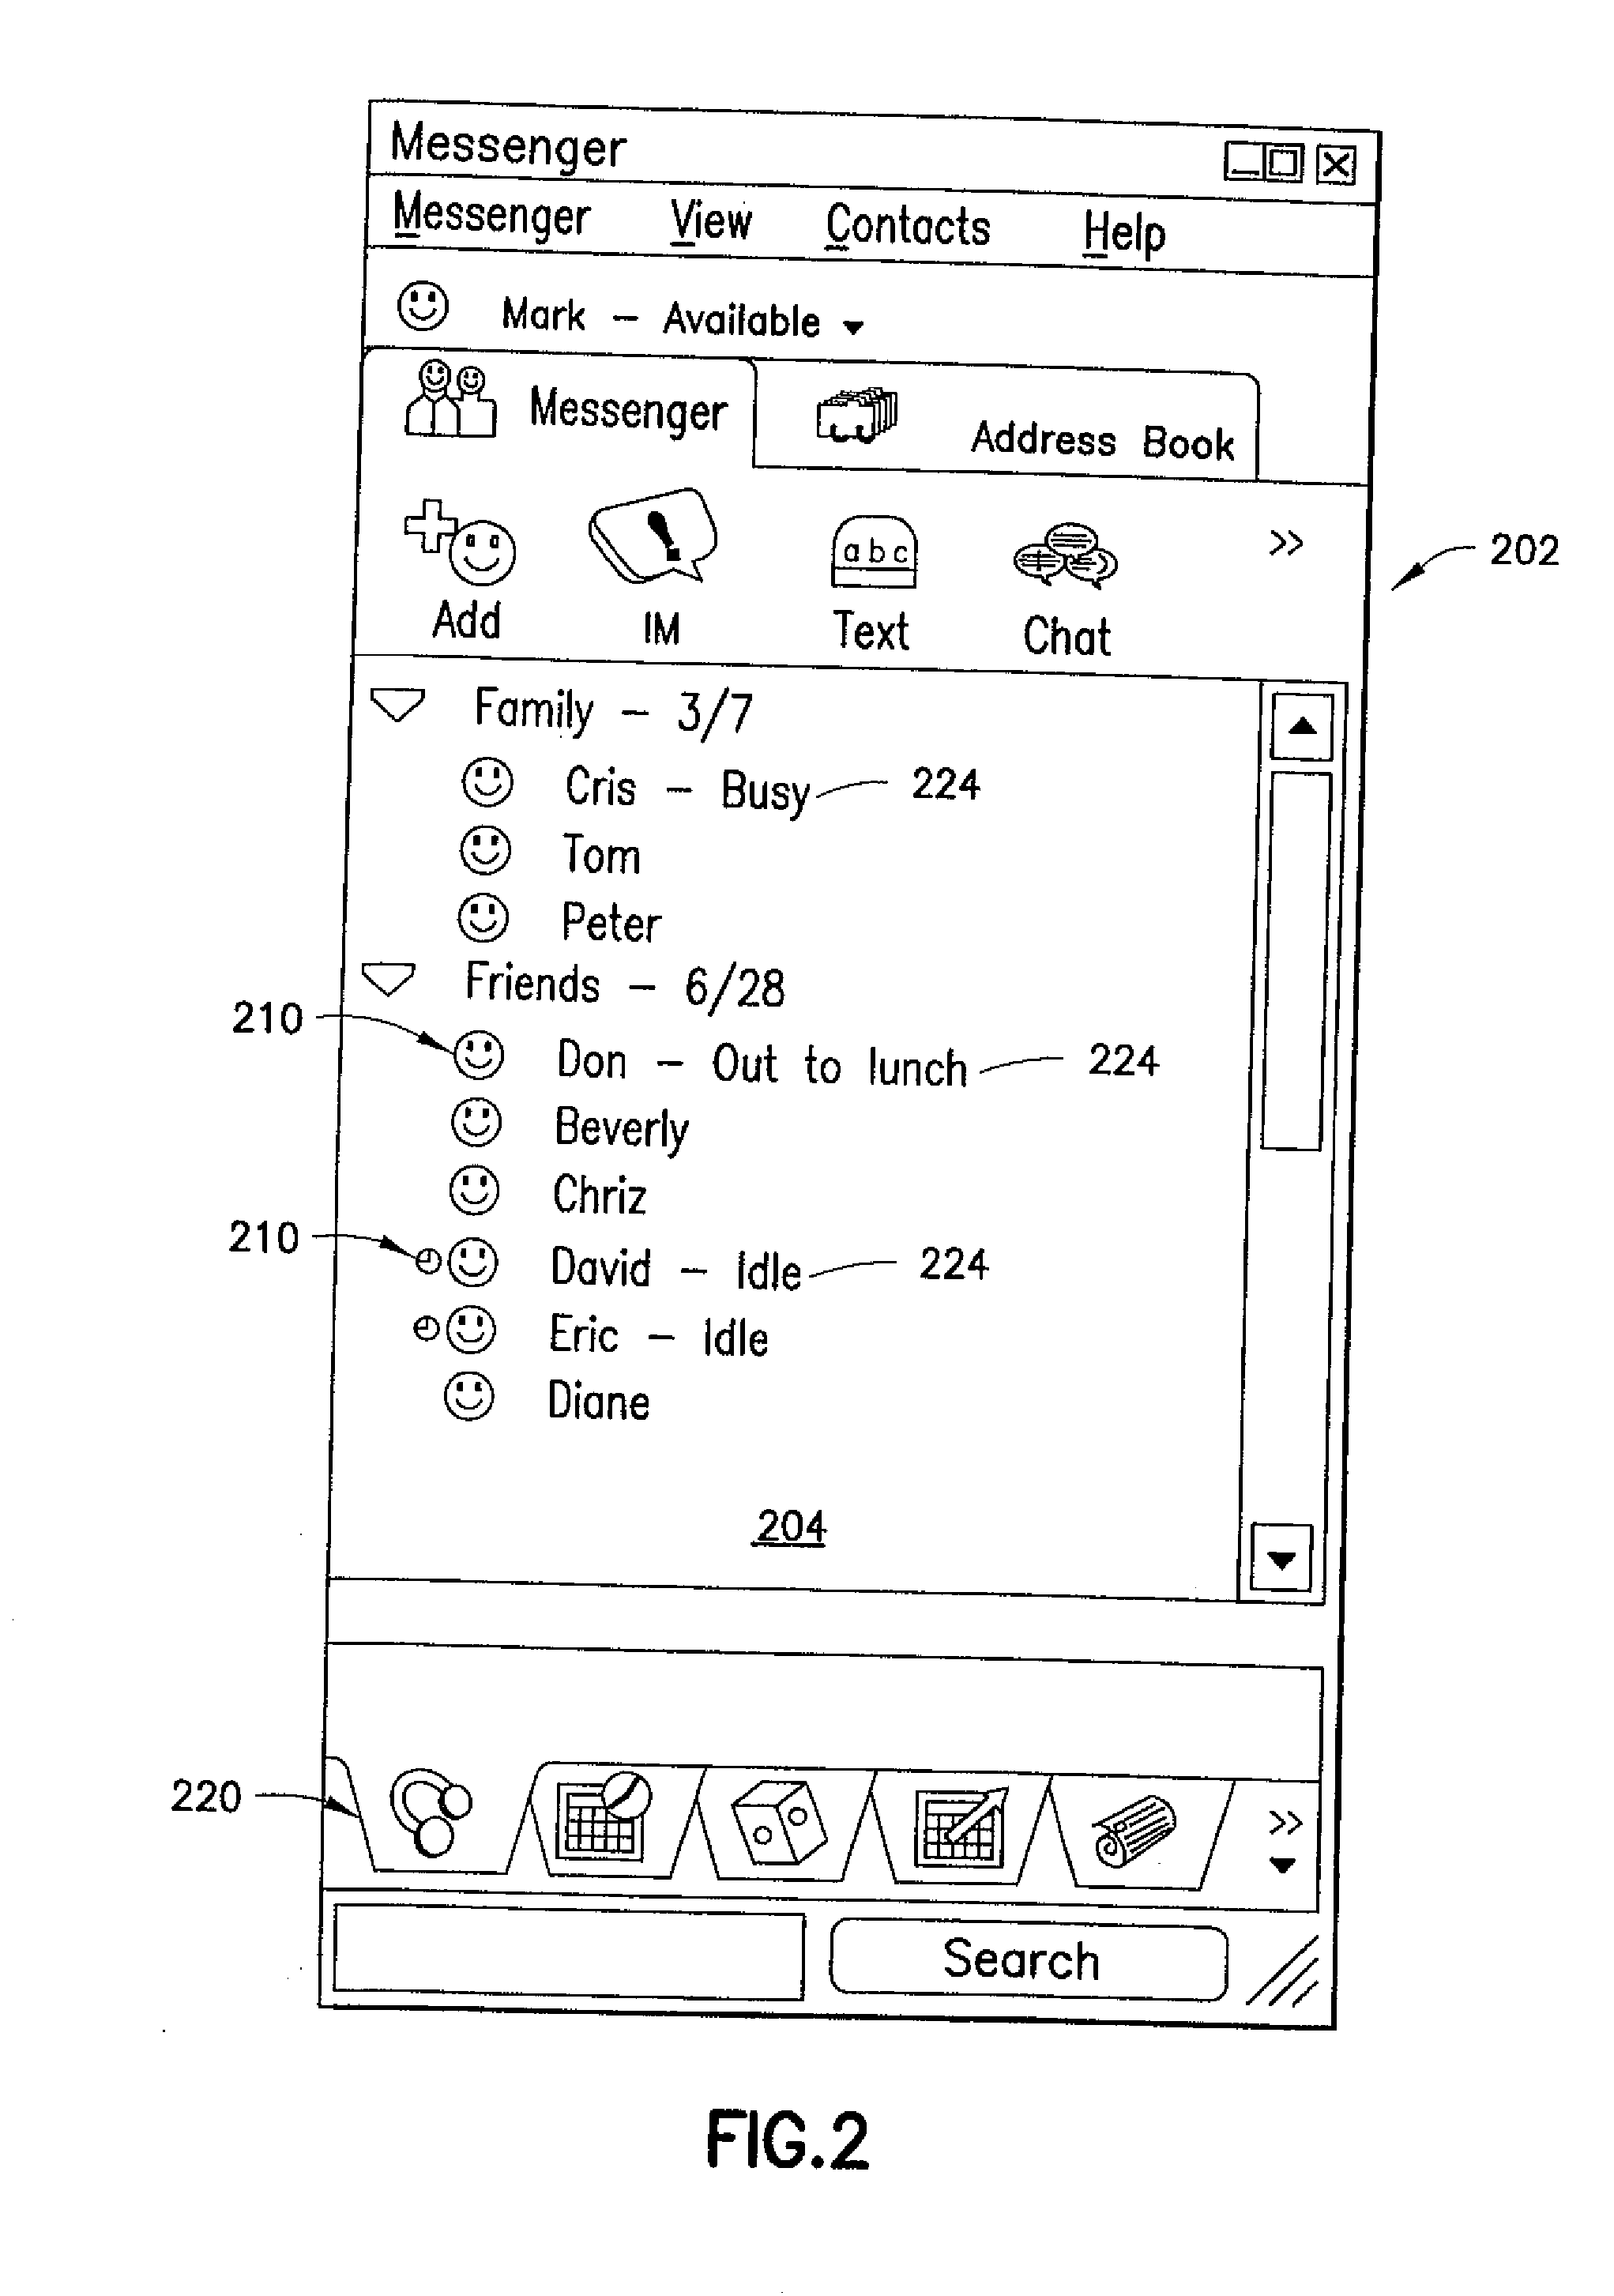 System and method for enhanced messaging